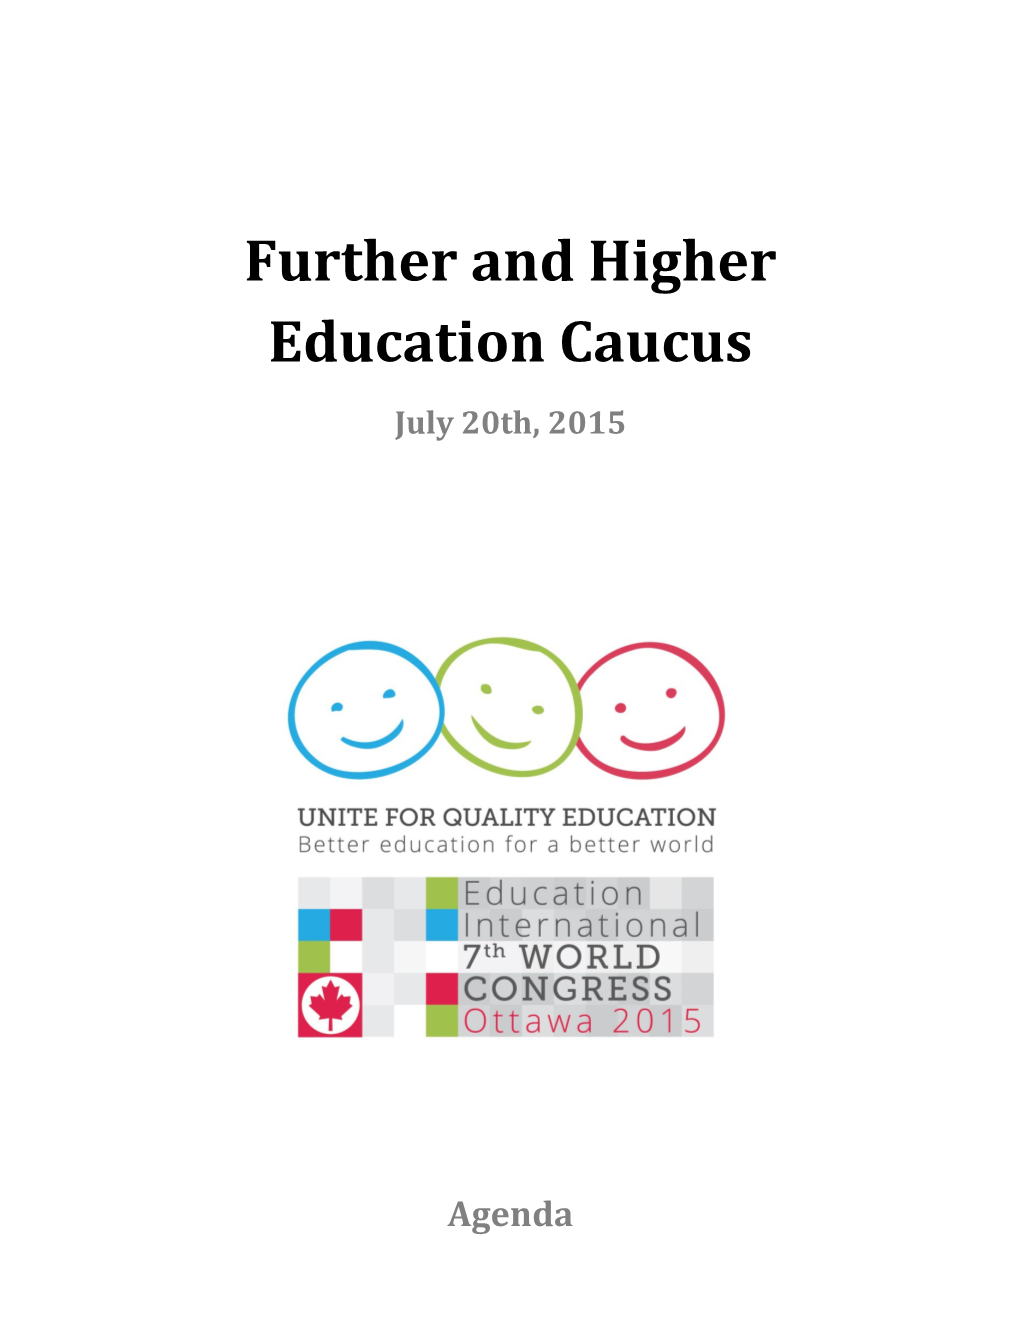 Further and Higher Education Caucus